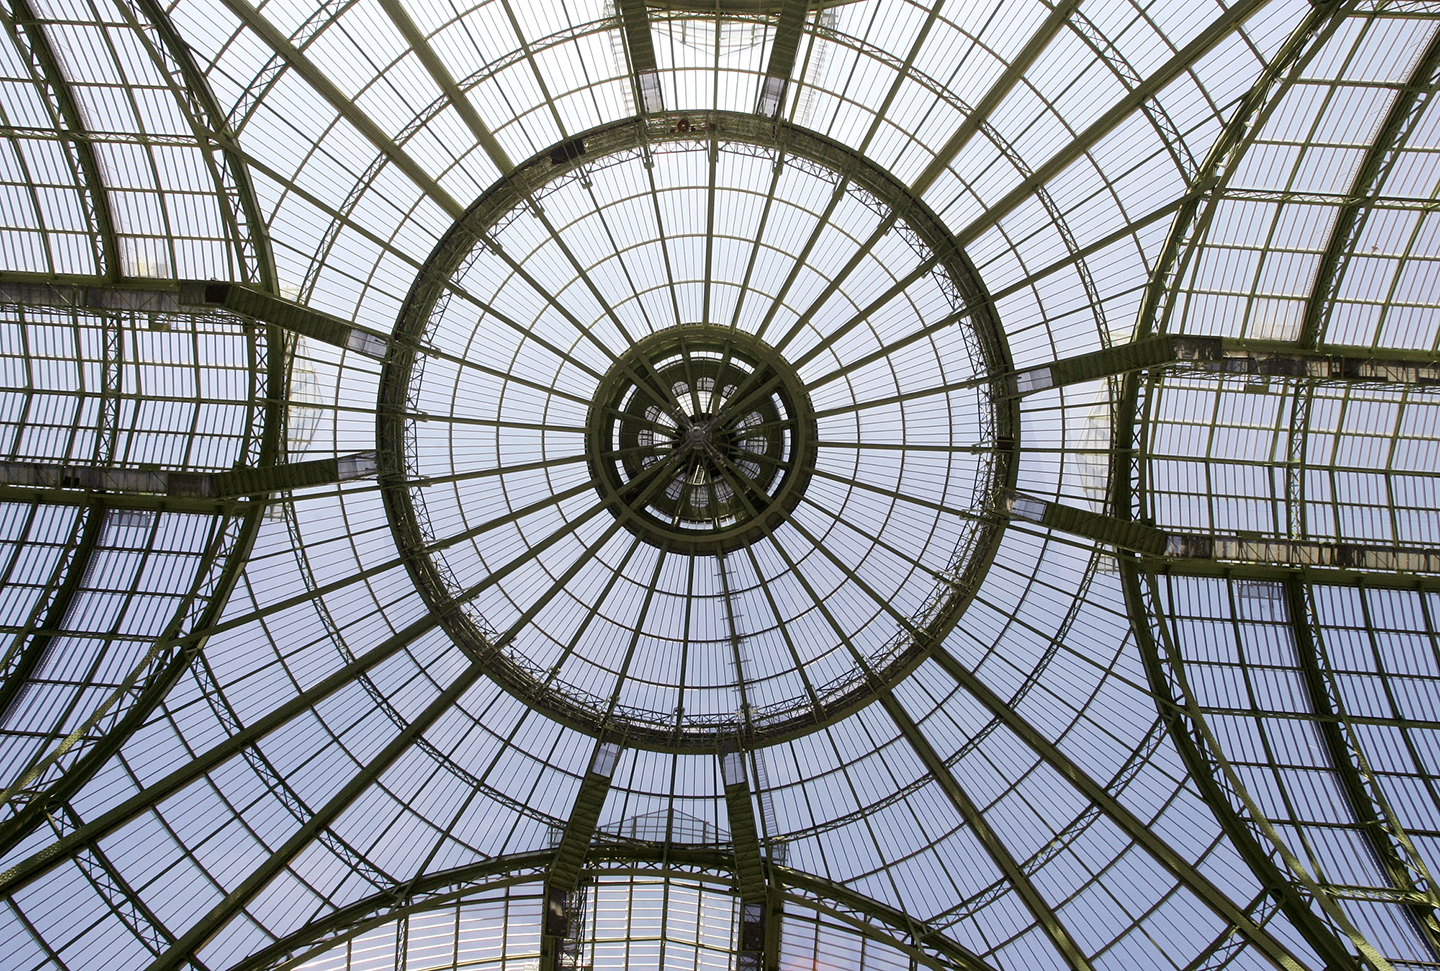 The Grand Palais's dome made of glass and steel, one of the architectural jewels of Paris, is seen Tuesday Aug. 30, 2005. The Grand Palais, that first opened in 1900 for the World Fair, throws open its door on Sept. 17 after a dozen years of renovations. (AP Photo/Francois Mori)